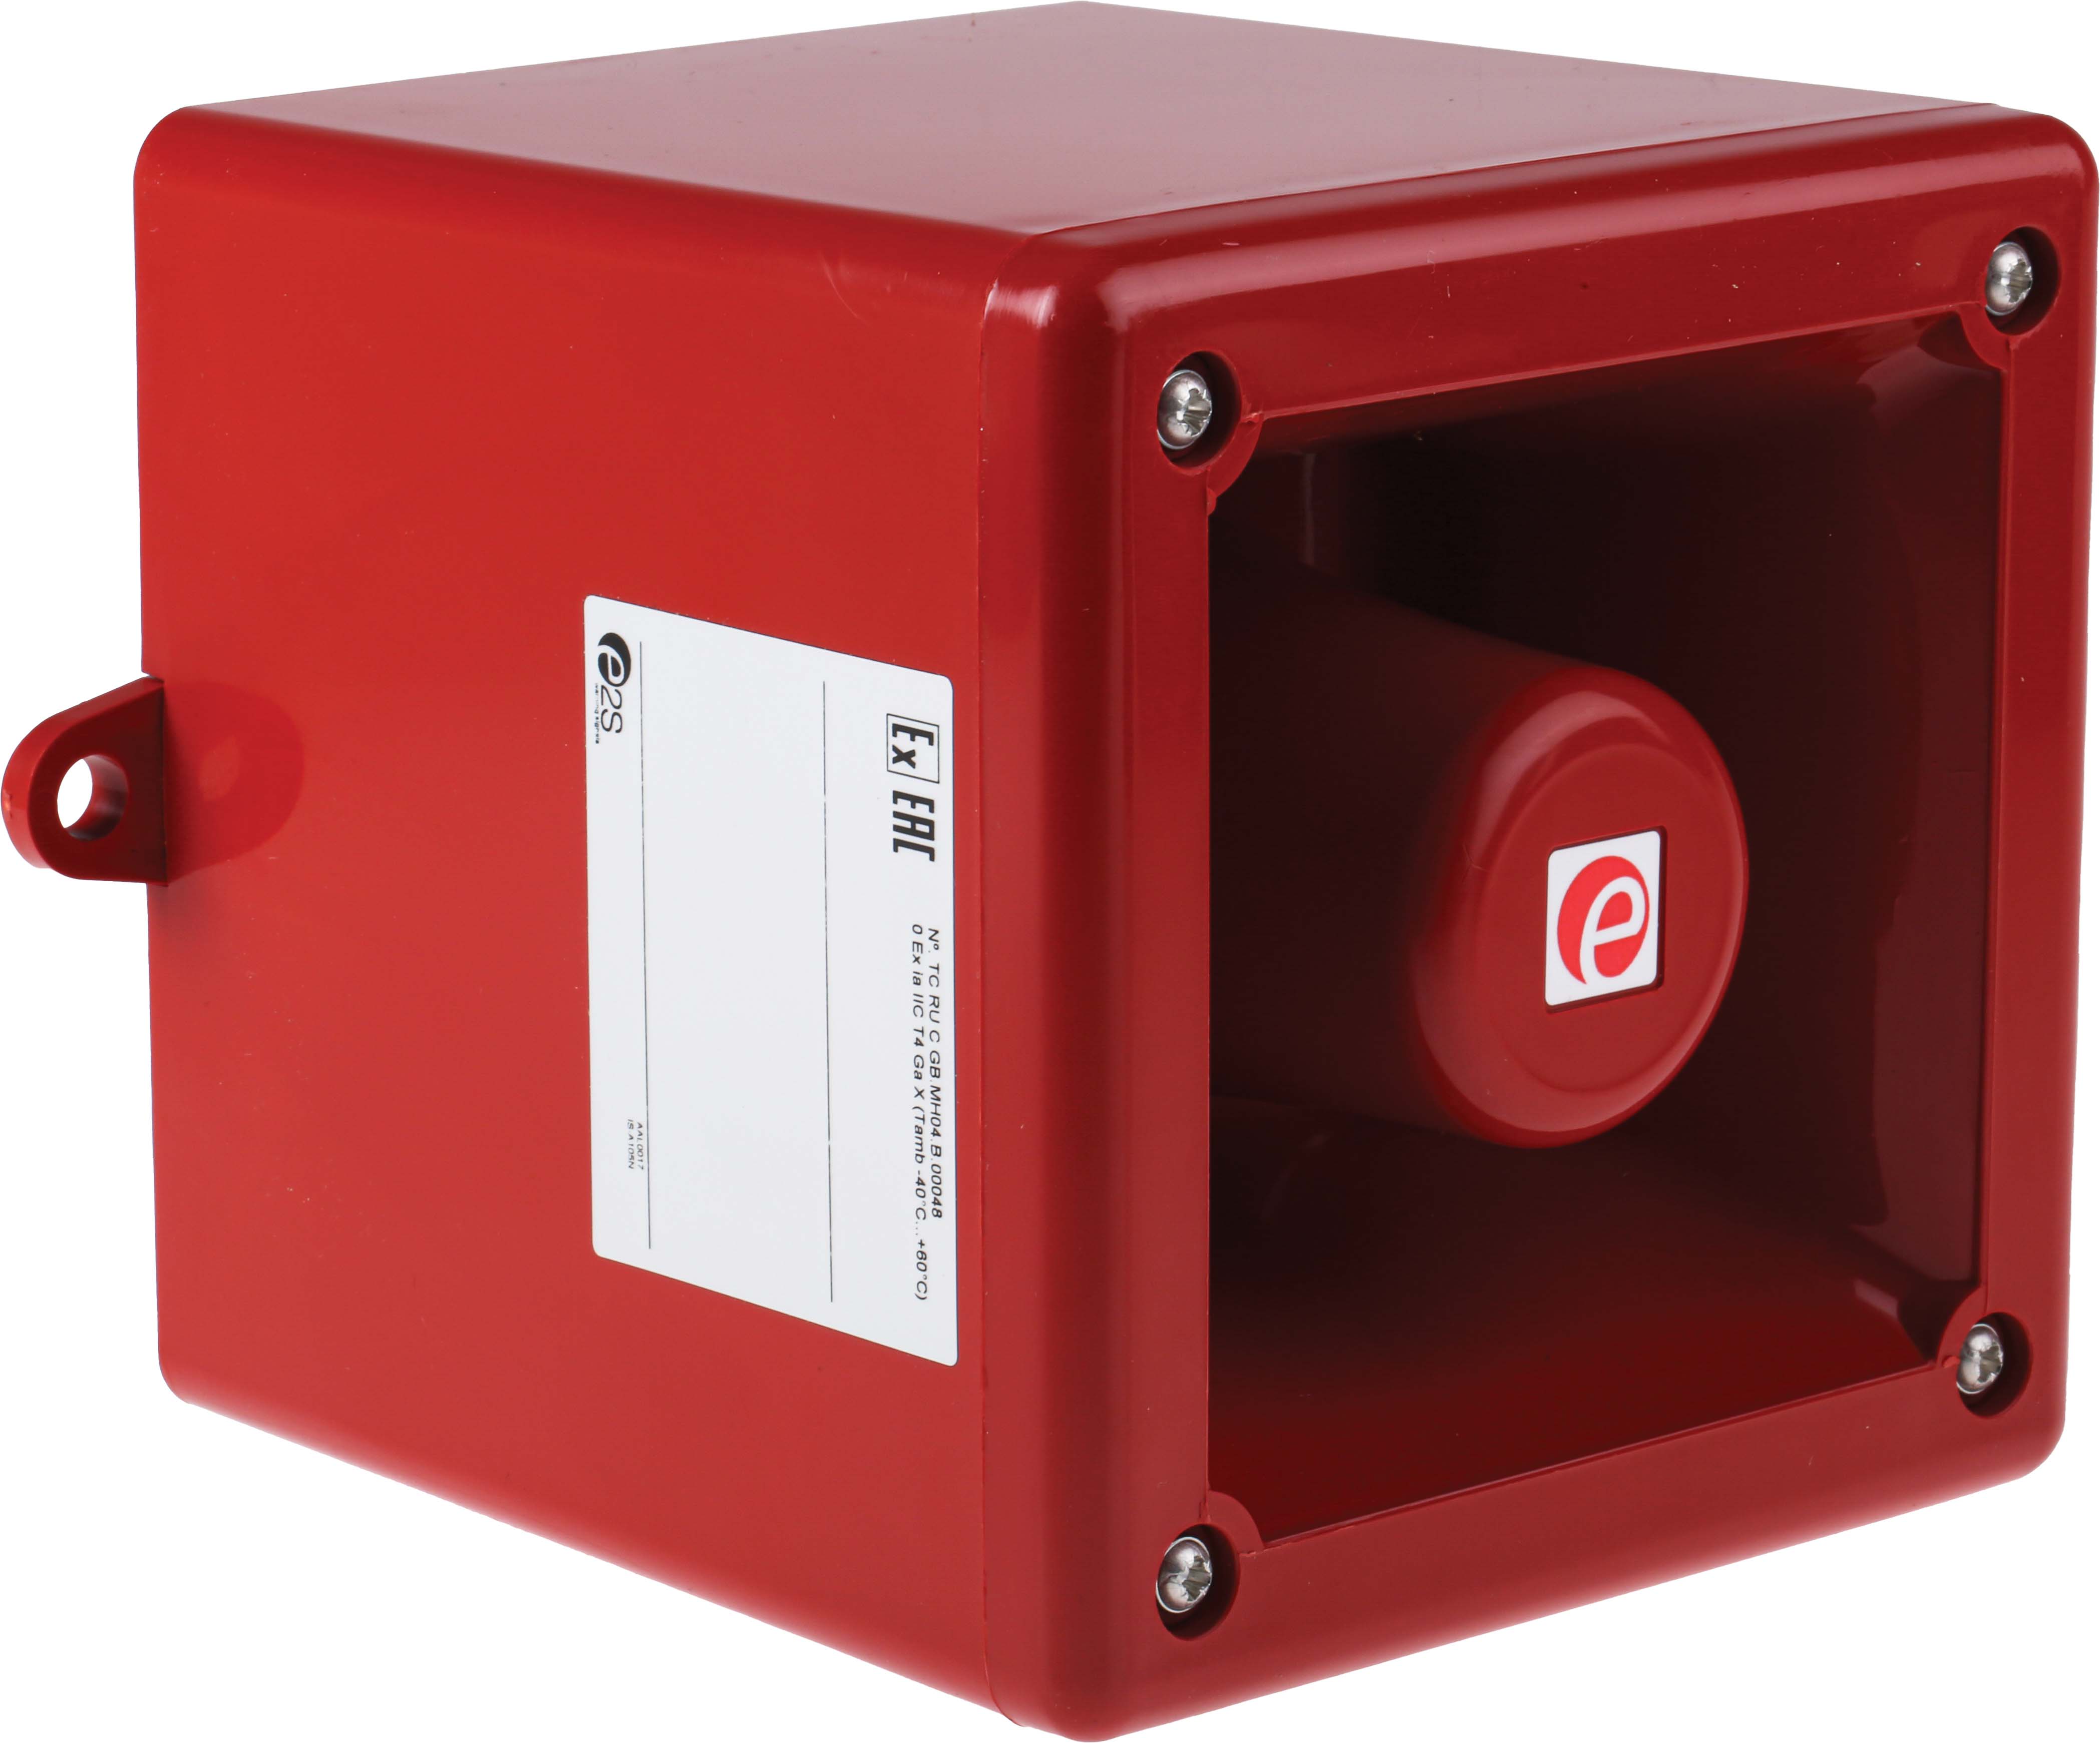 e2s IS-A105N Series Red 49-Tone Electronic Sounder, 16 → 28 V dc, 105dB at 1 Metre, Surface Mount, IP66